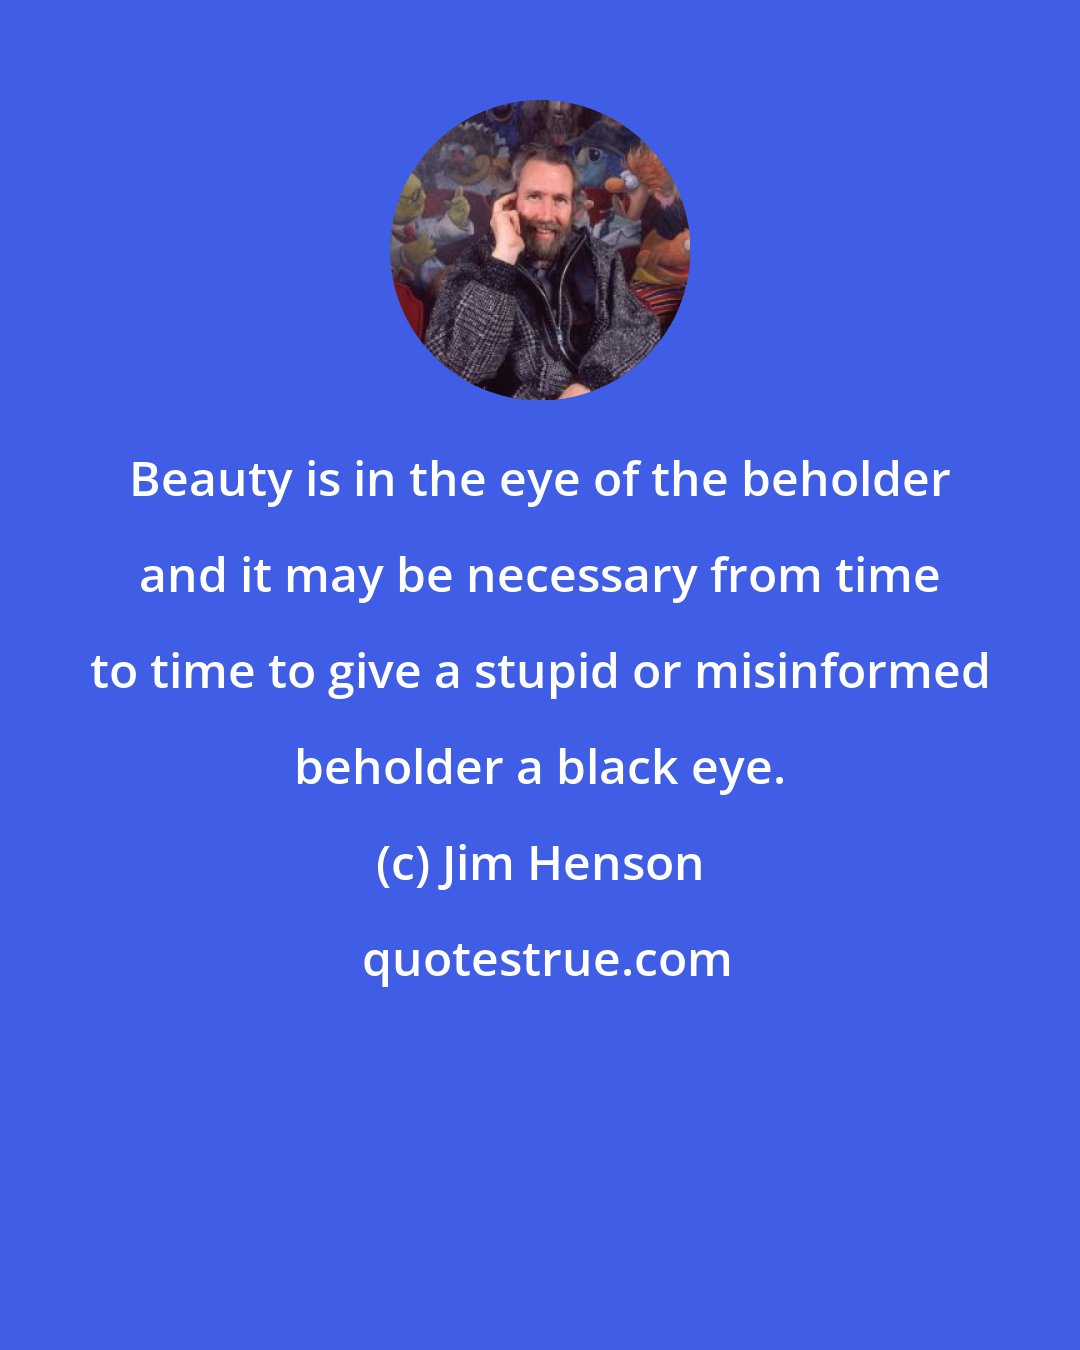 Jim Henson: Beauty is in the eye of the beholder and it may be necessary from time to time to give a stupid or misinformed beholder a black eye.